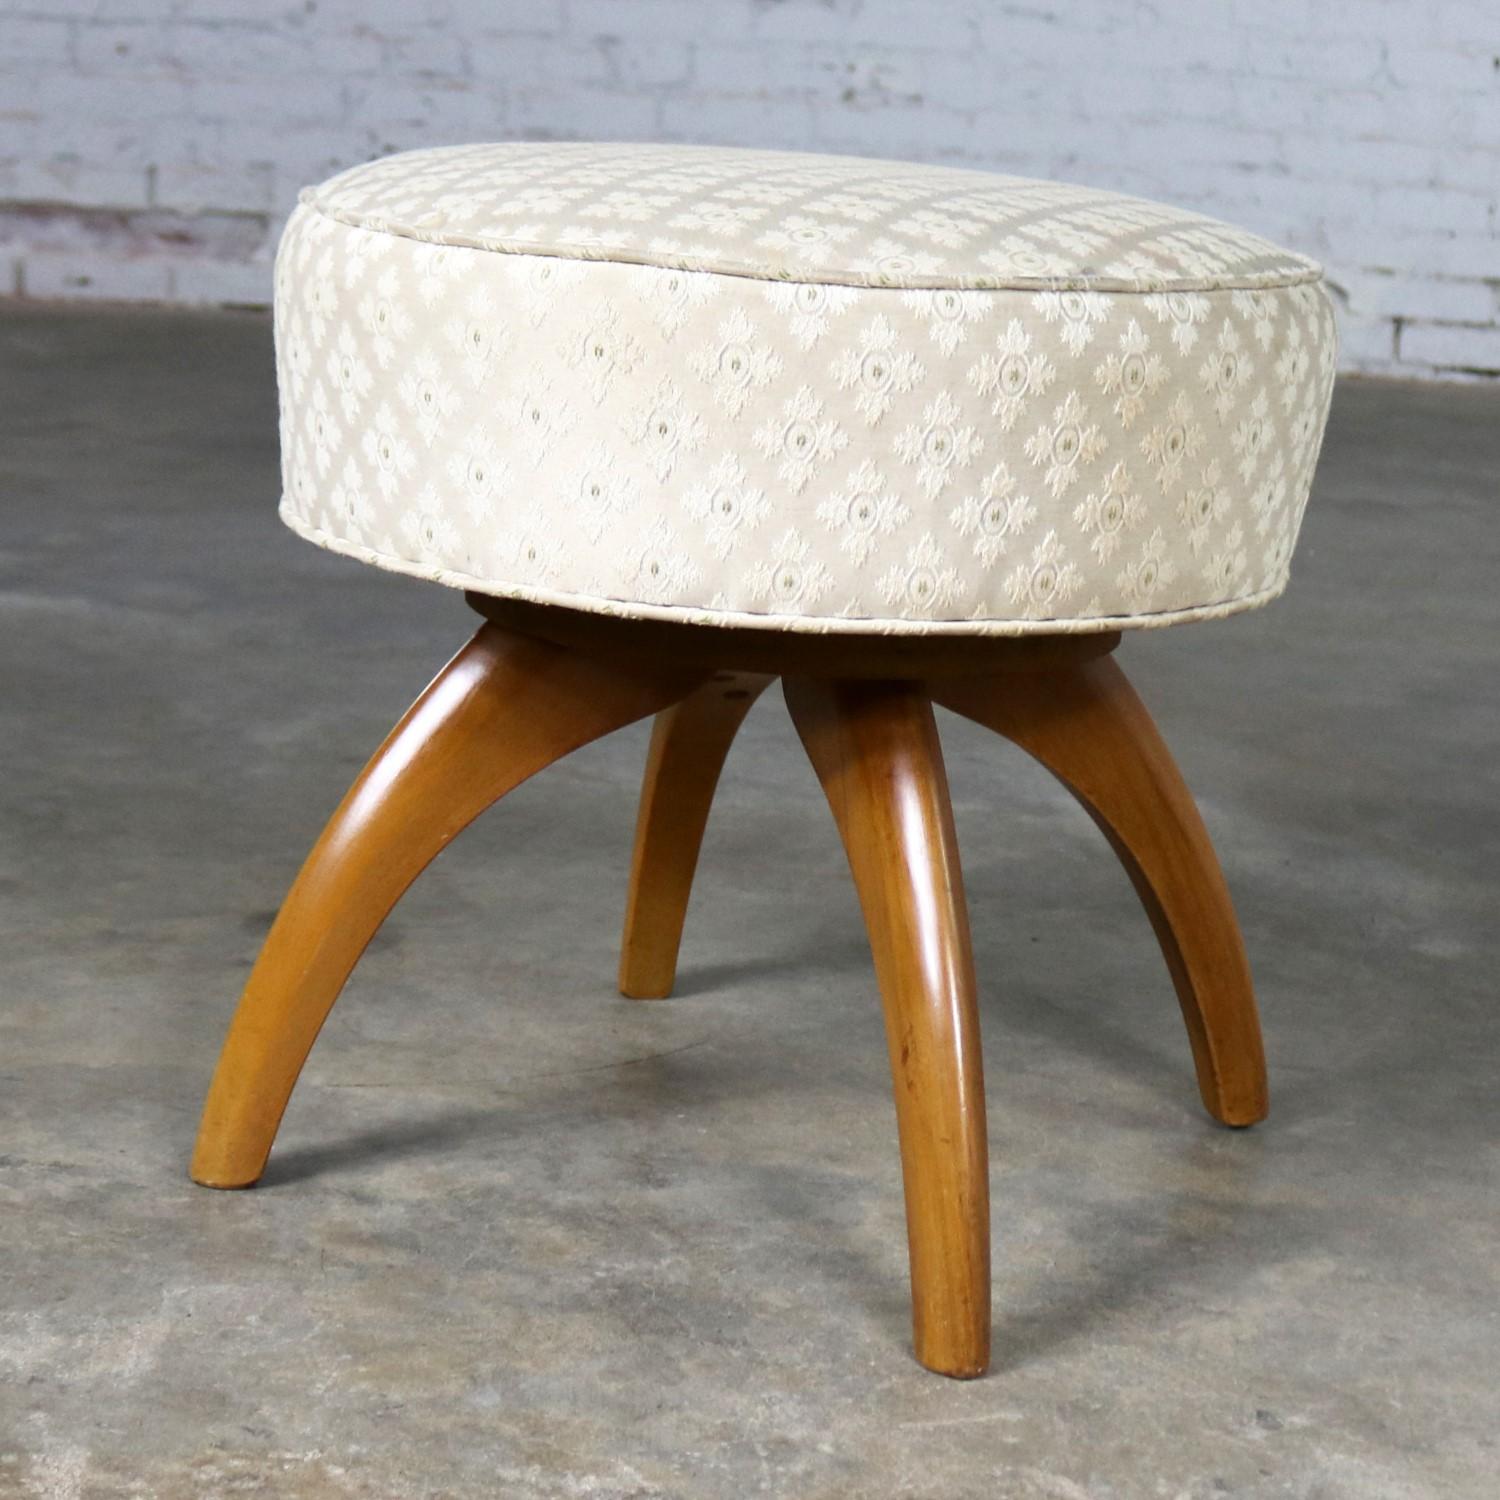 Handsome swivel Heywood-Wakefield round vanity stool or ottoman pouf from their Kohinoor collection and attributed to Ernst Herrmann. It is in wonderful vintage condition. The beautiful original wheat finish on the legs is not flawless but almost.